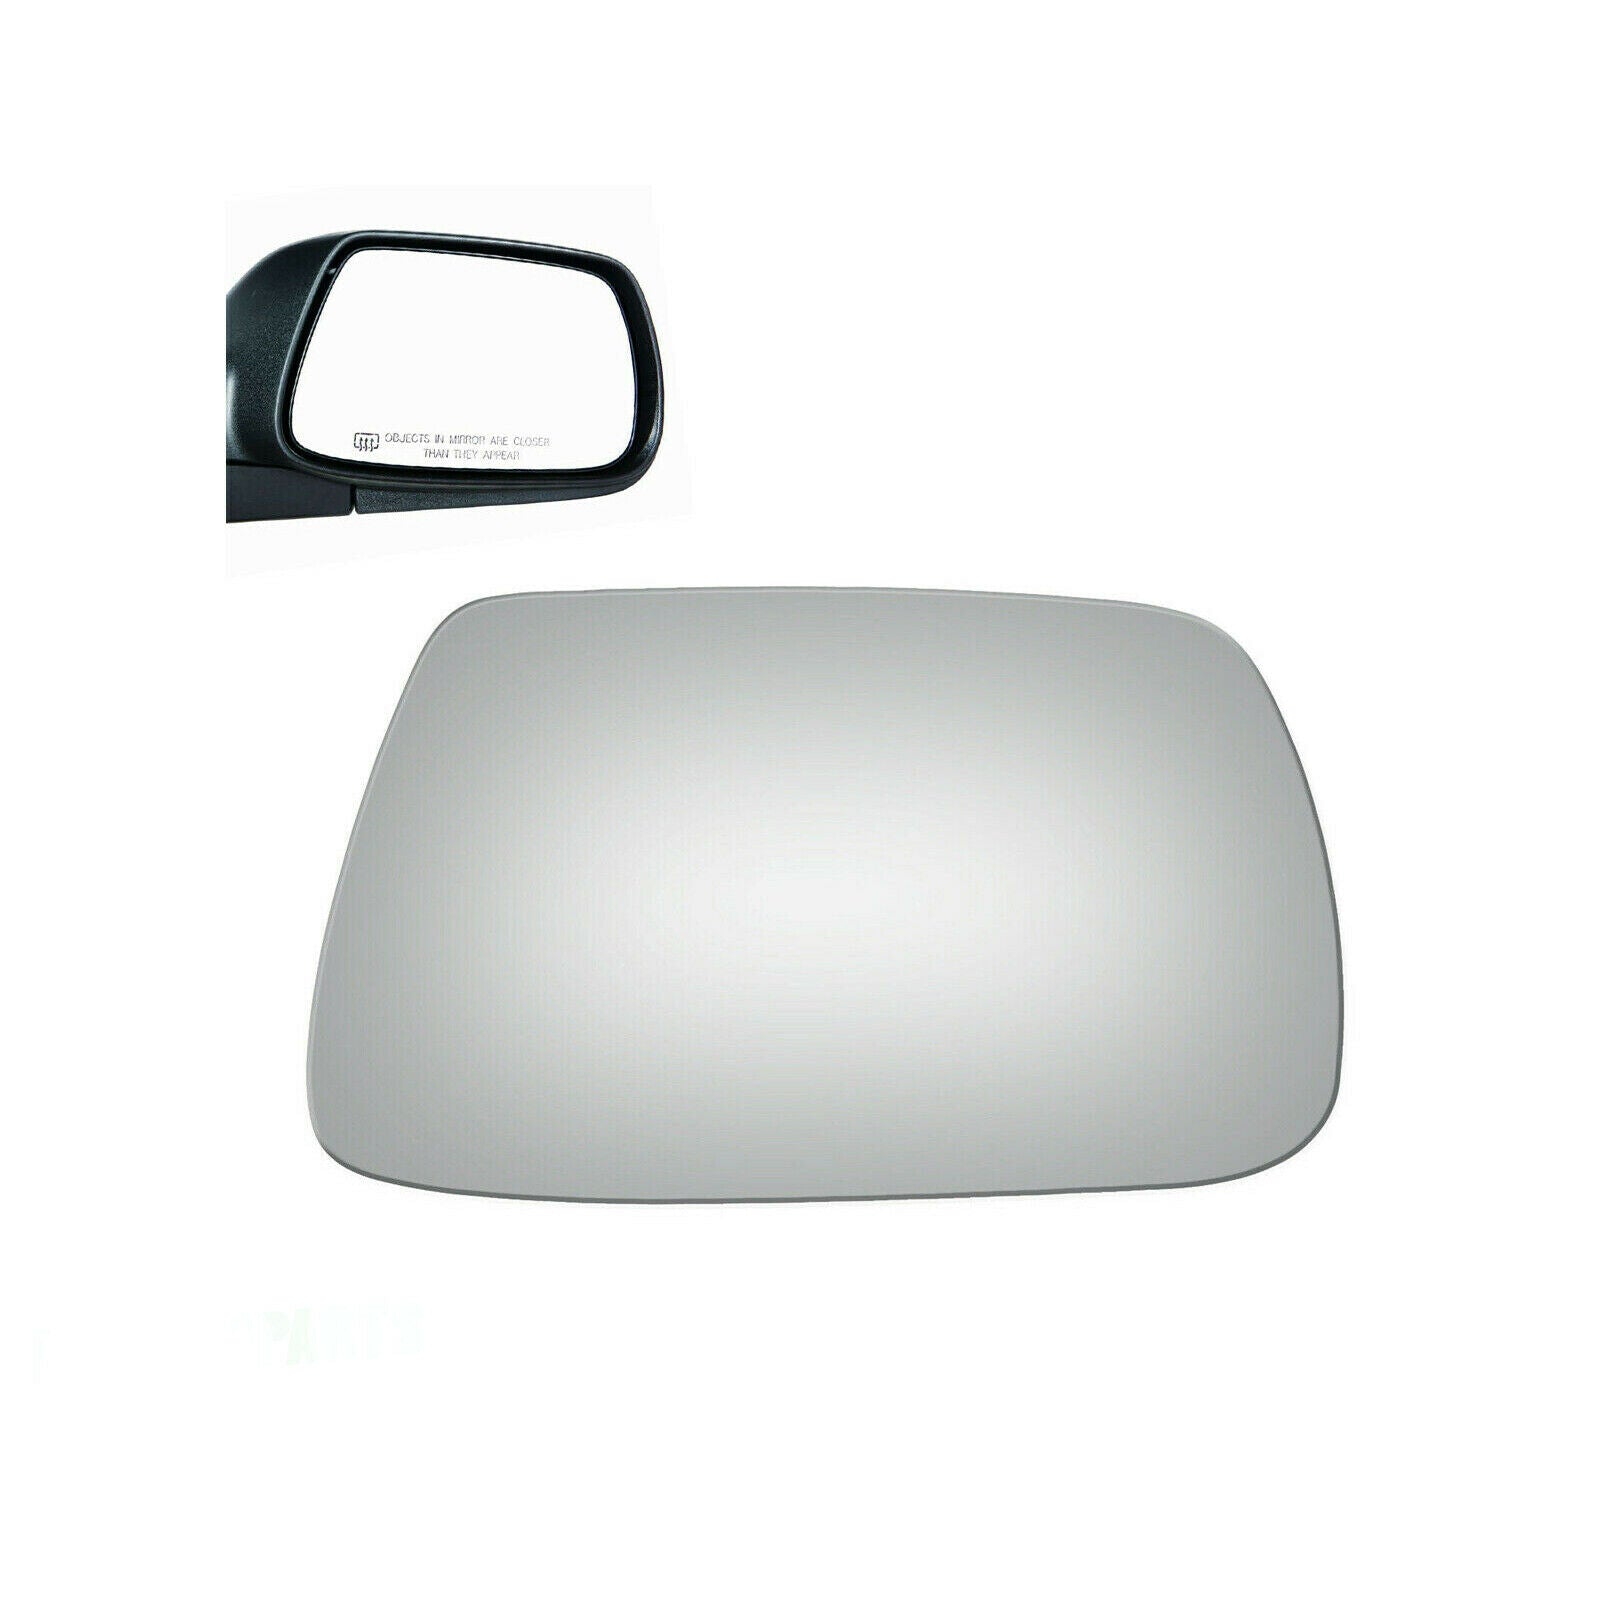 WLLW Mirror Glass Replacement for 2005-2010 Jeep Grand Cherokee, Driver Left Side LH/Passenger Right Side RH/The Both Sides Flat Convex M-0053